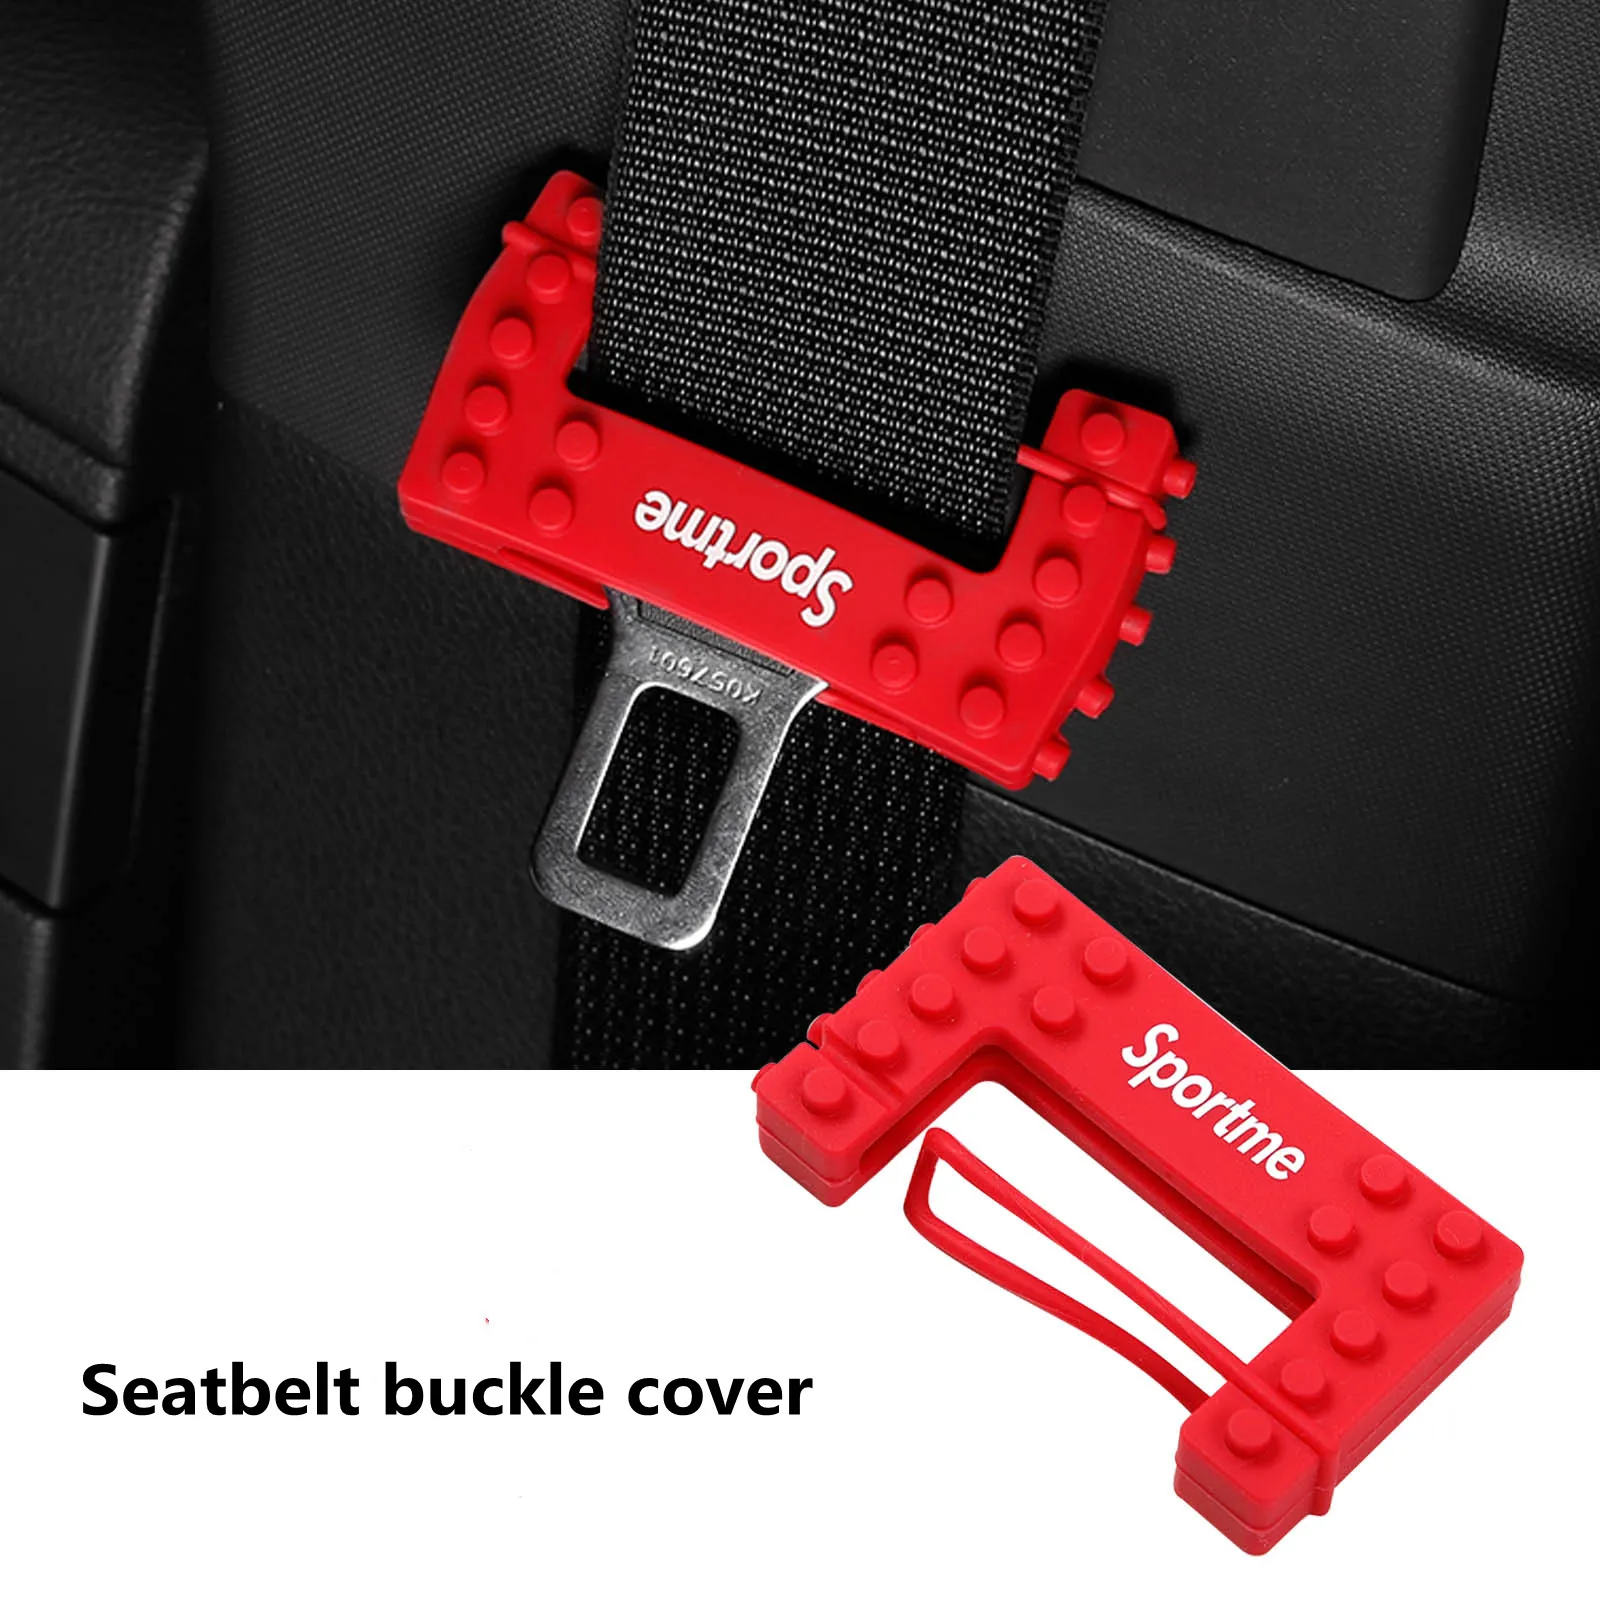 1pc Seat Belt Buckle Cover Silicone Anti-Scratch Cover Safety Red Accessori V9D3 